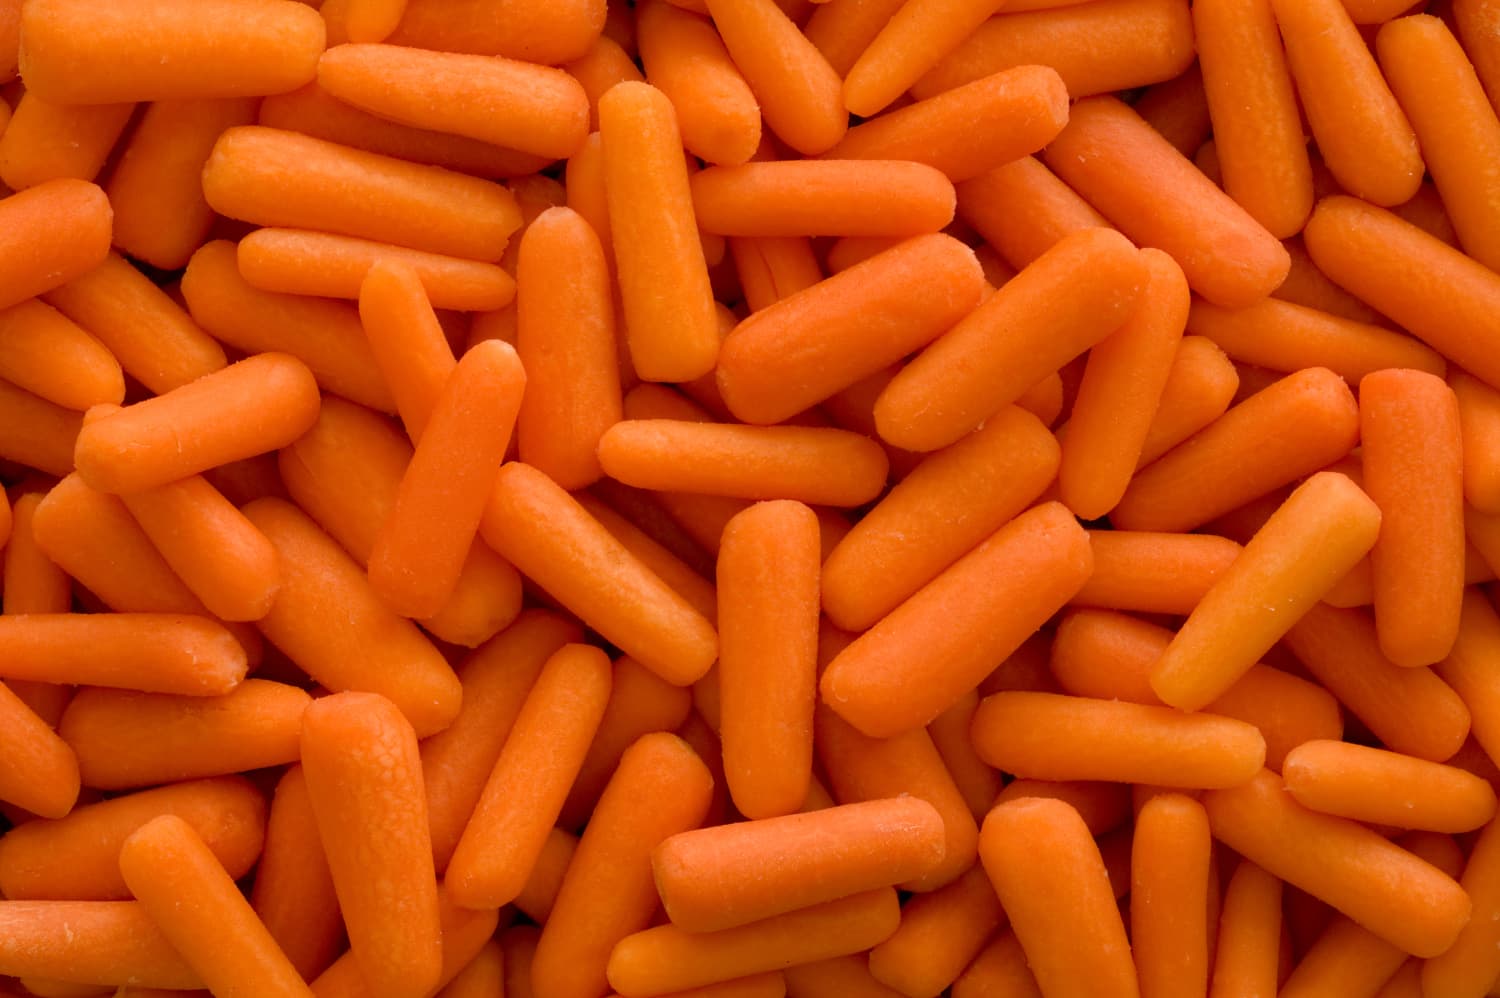 Why I’ll Never Ever Buy Baby Carrots Again